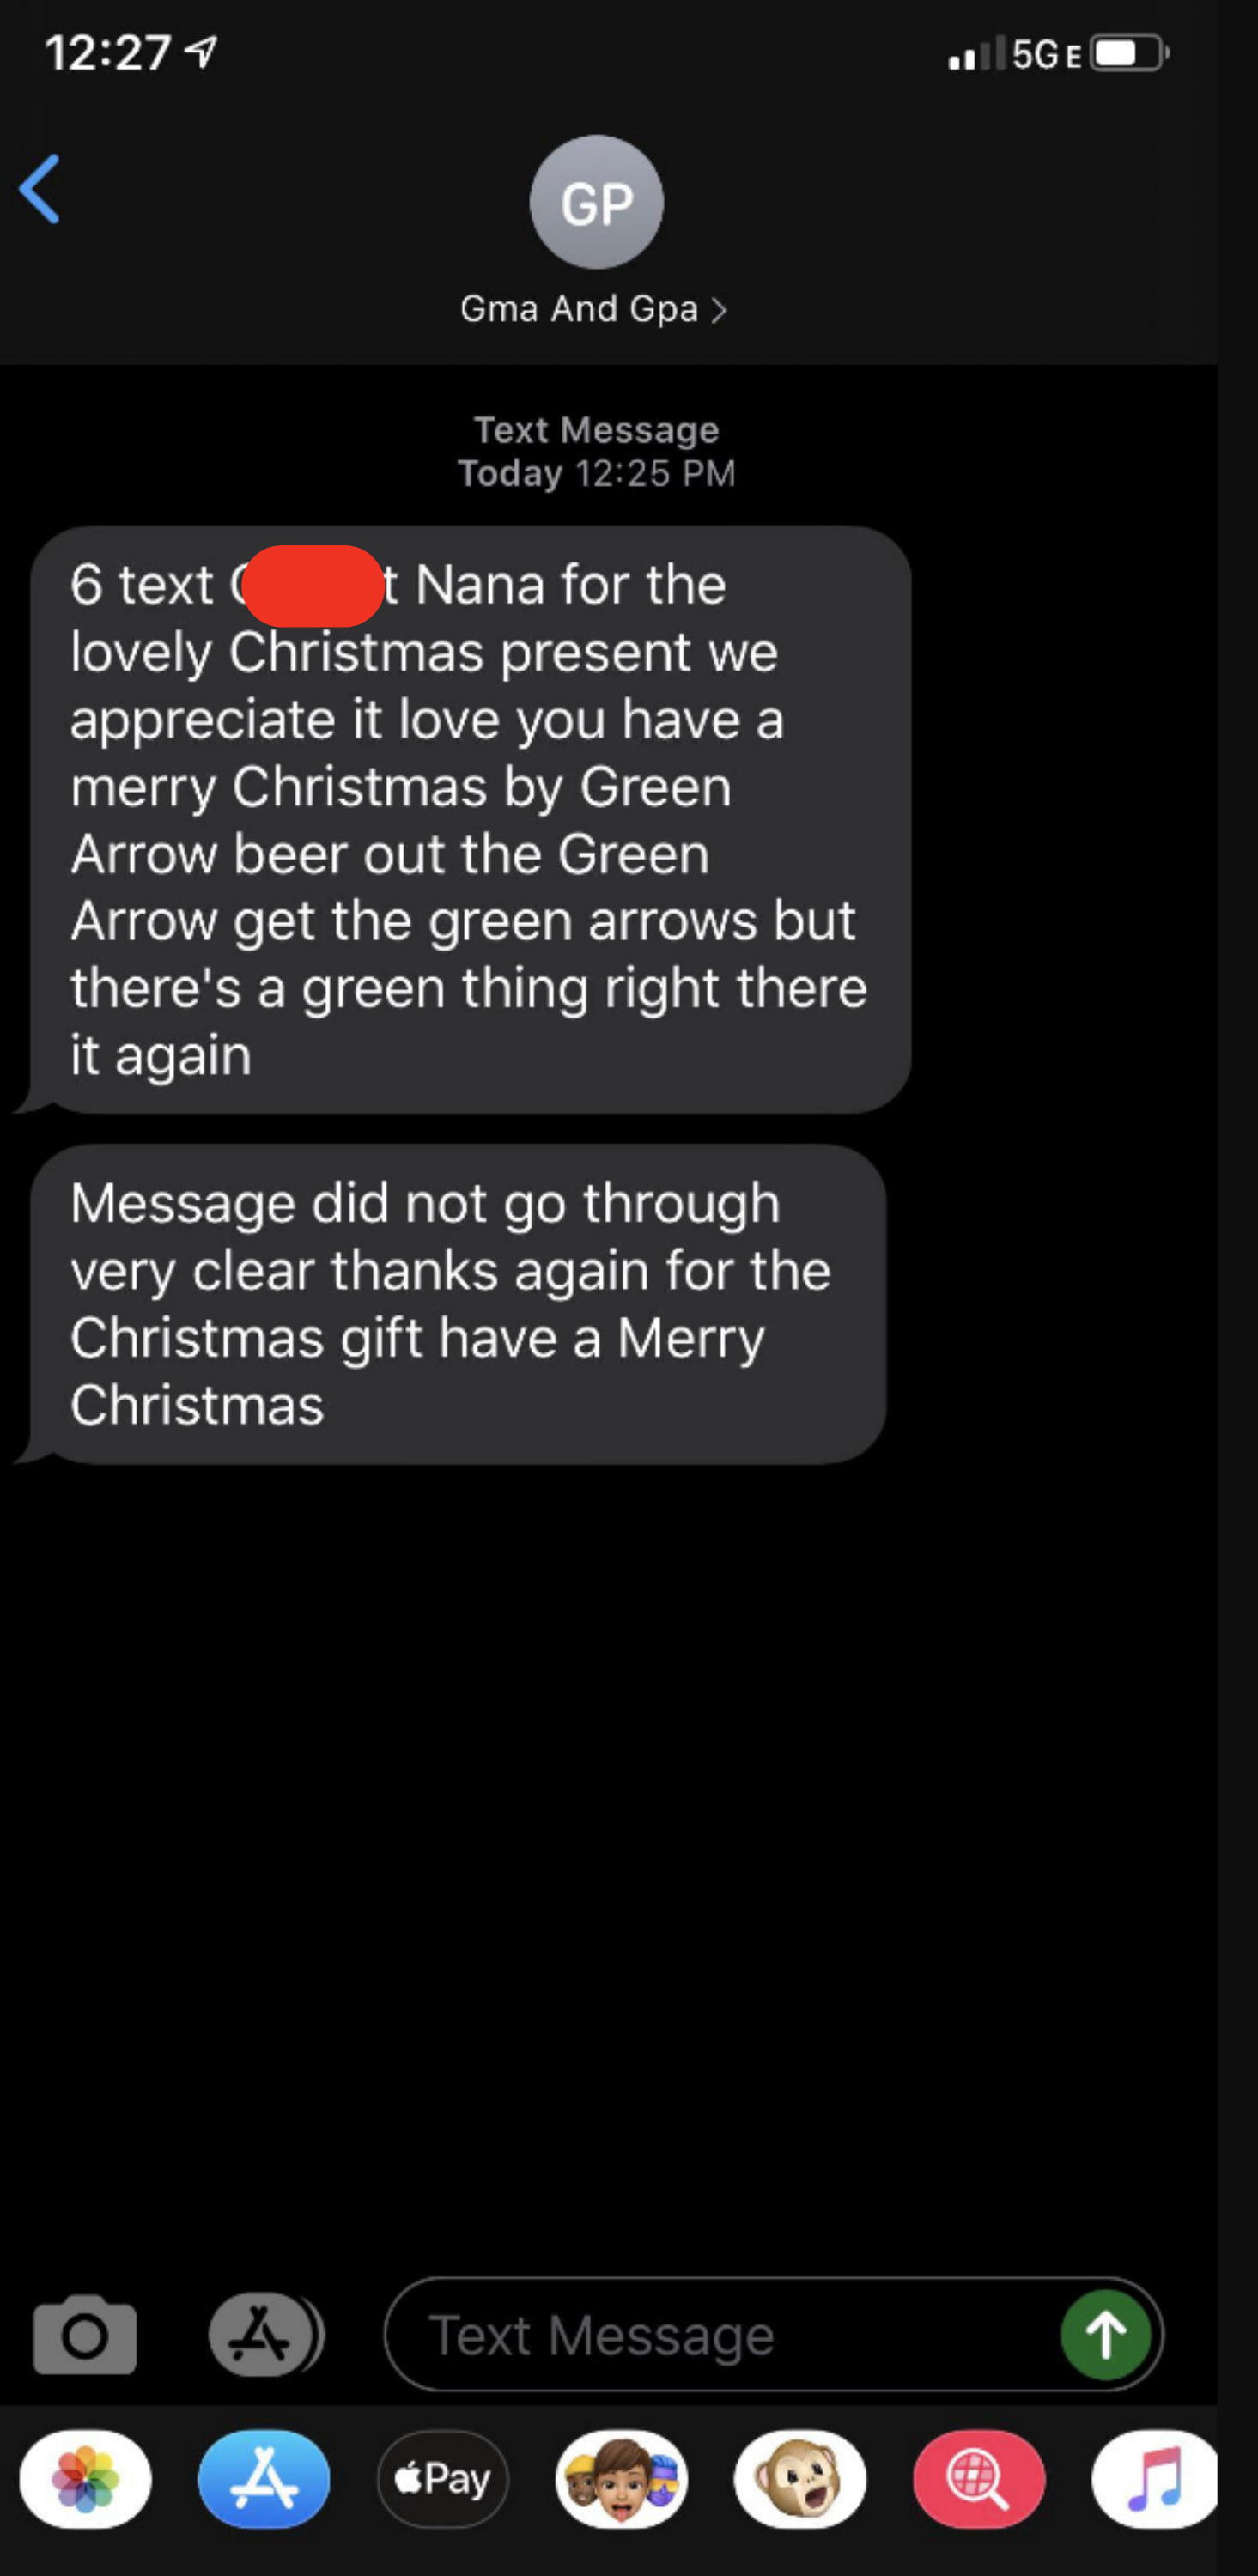 text message thanking someone for the christmas presents but with random phrases like green arrow inserted throughout